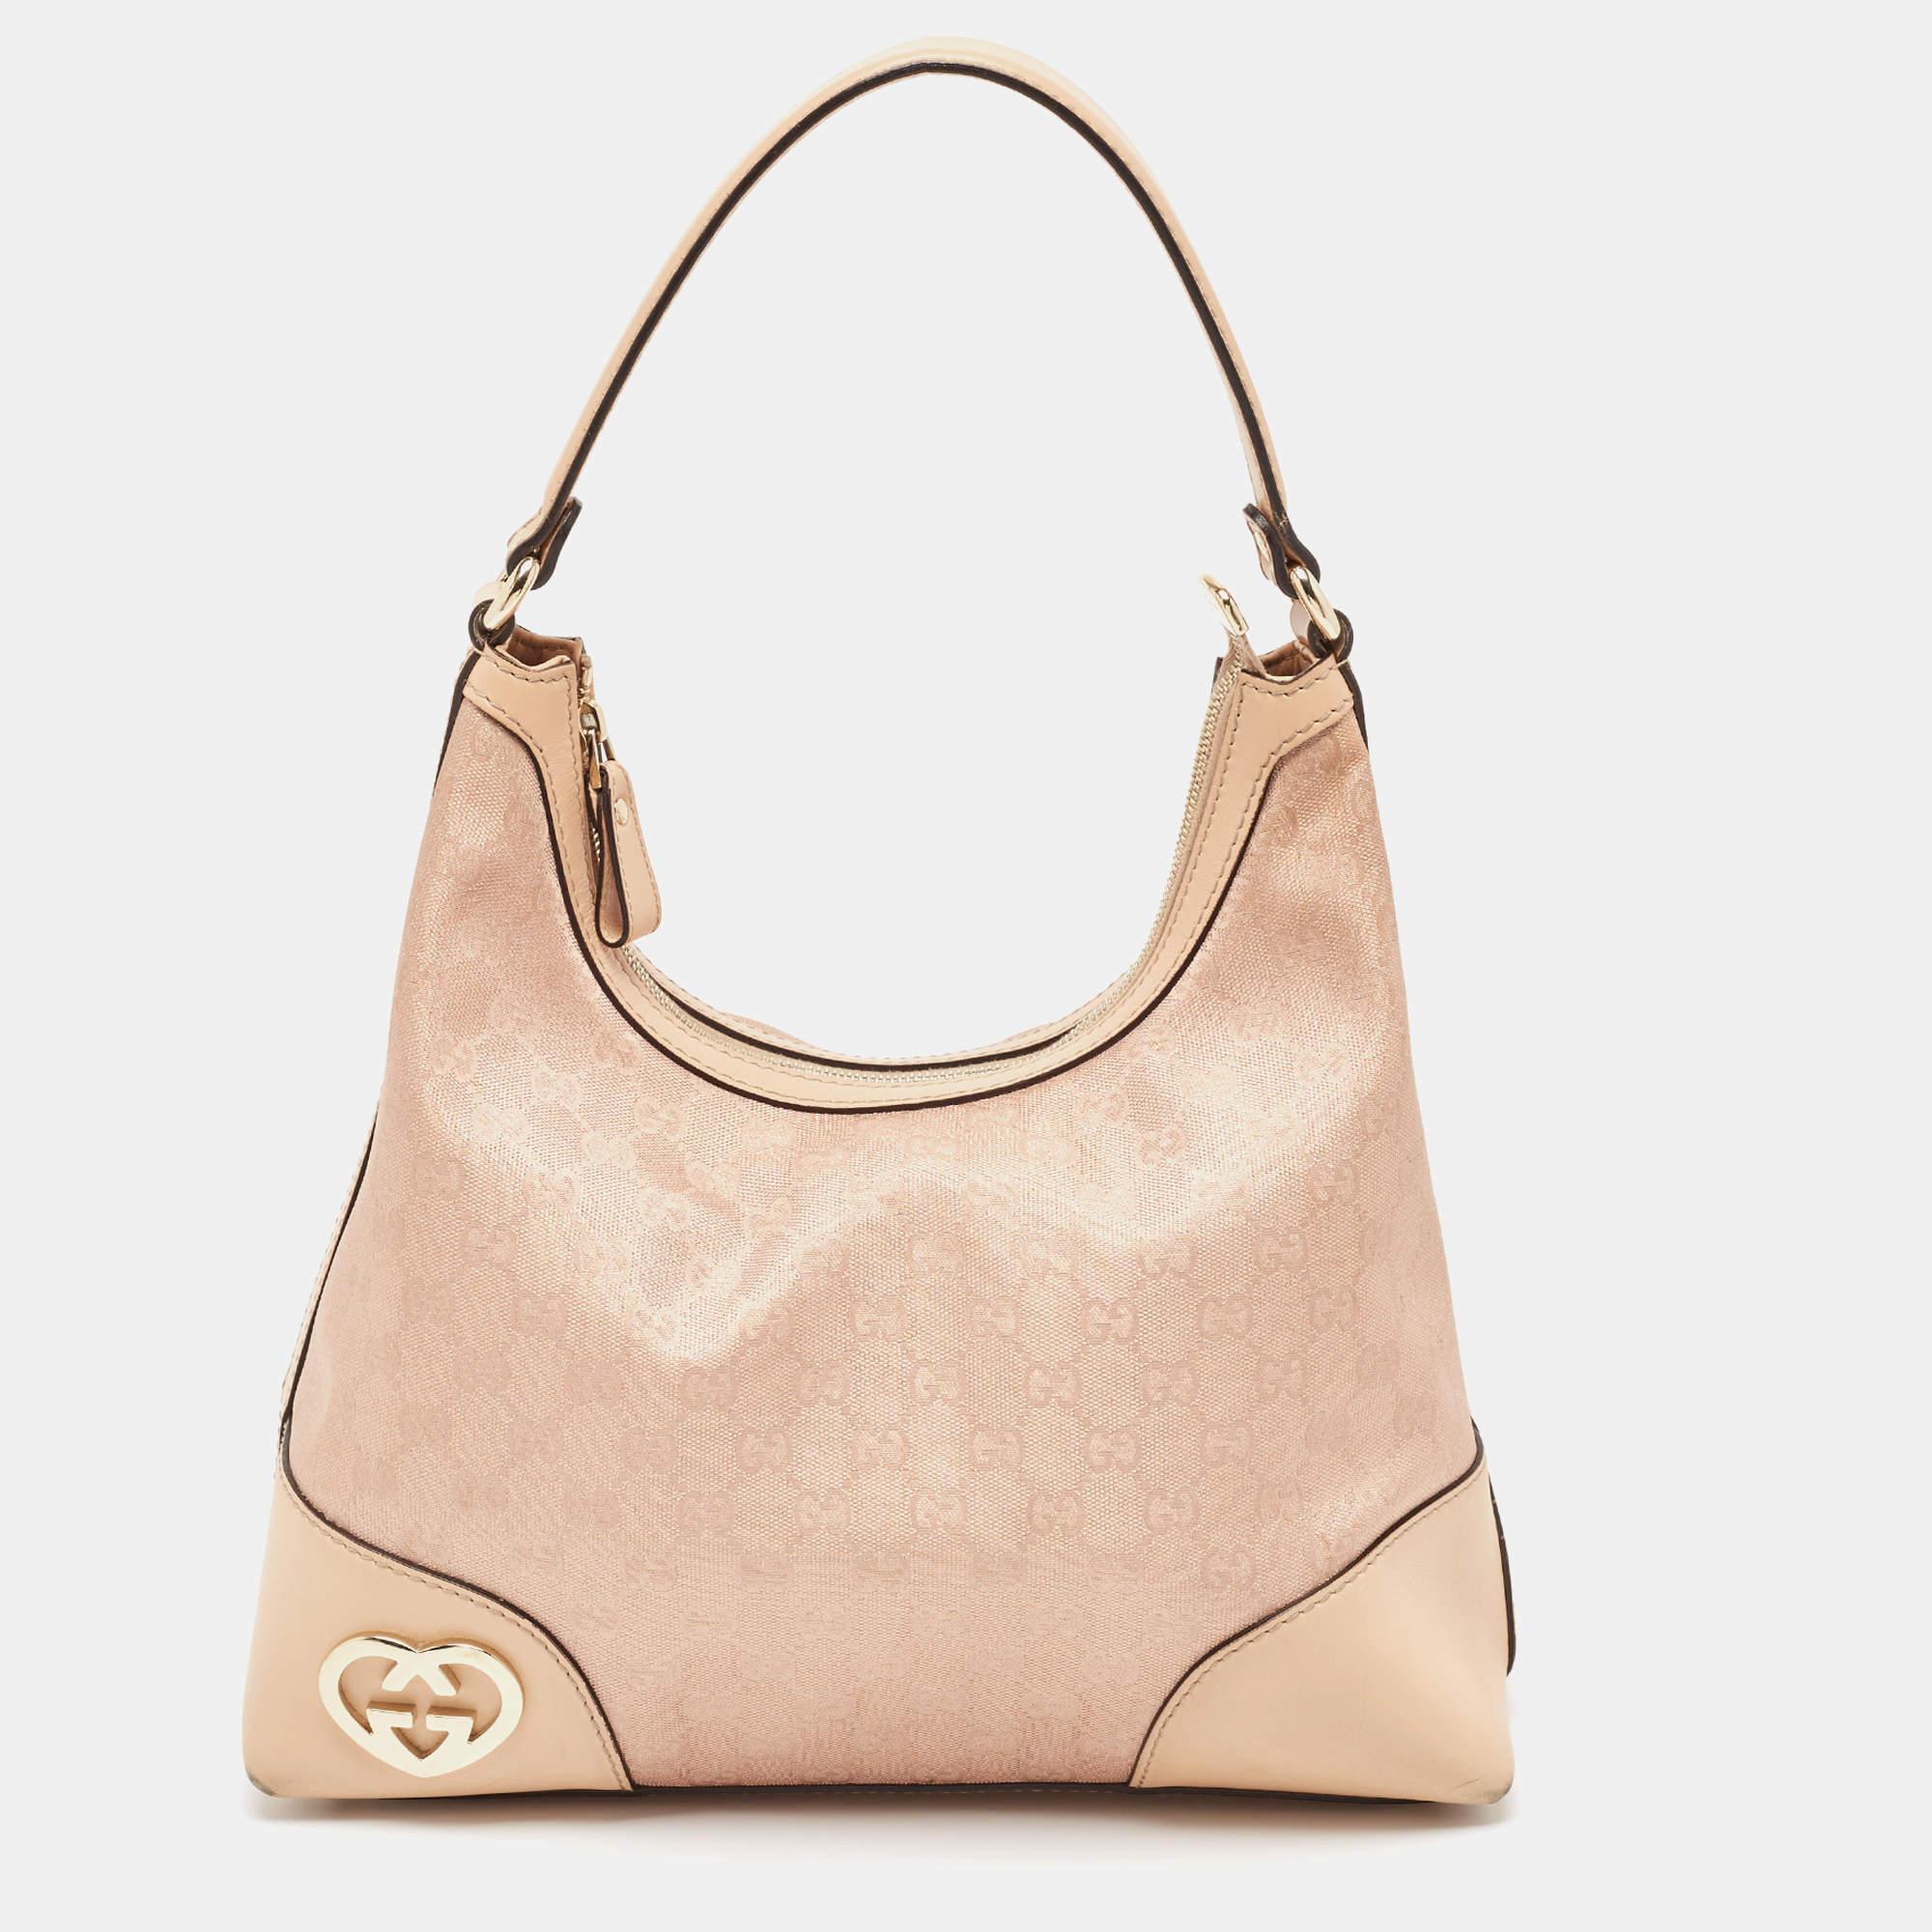 Gucci Beige/Metallic Pink GG Canvas and Leather Medium Lovely Hobo For Sale 6